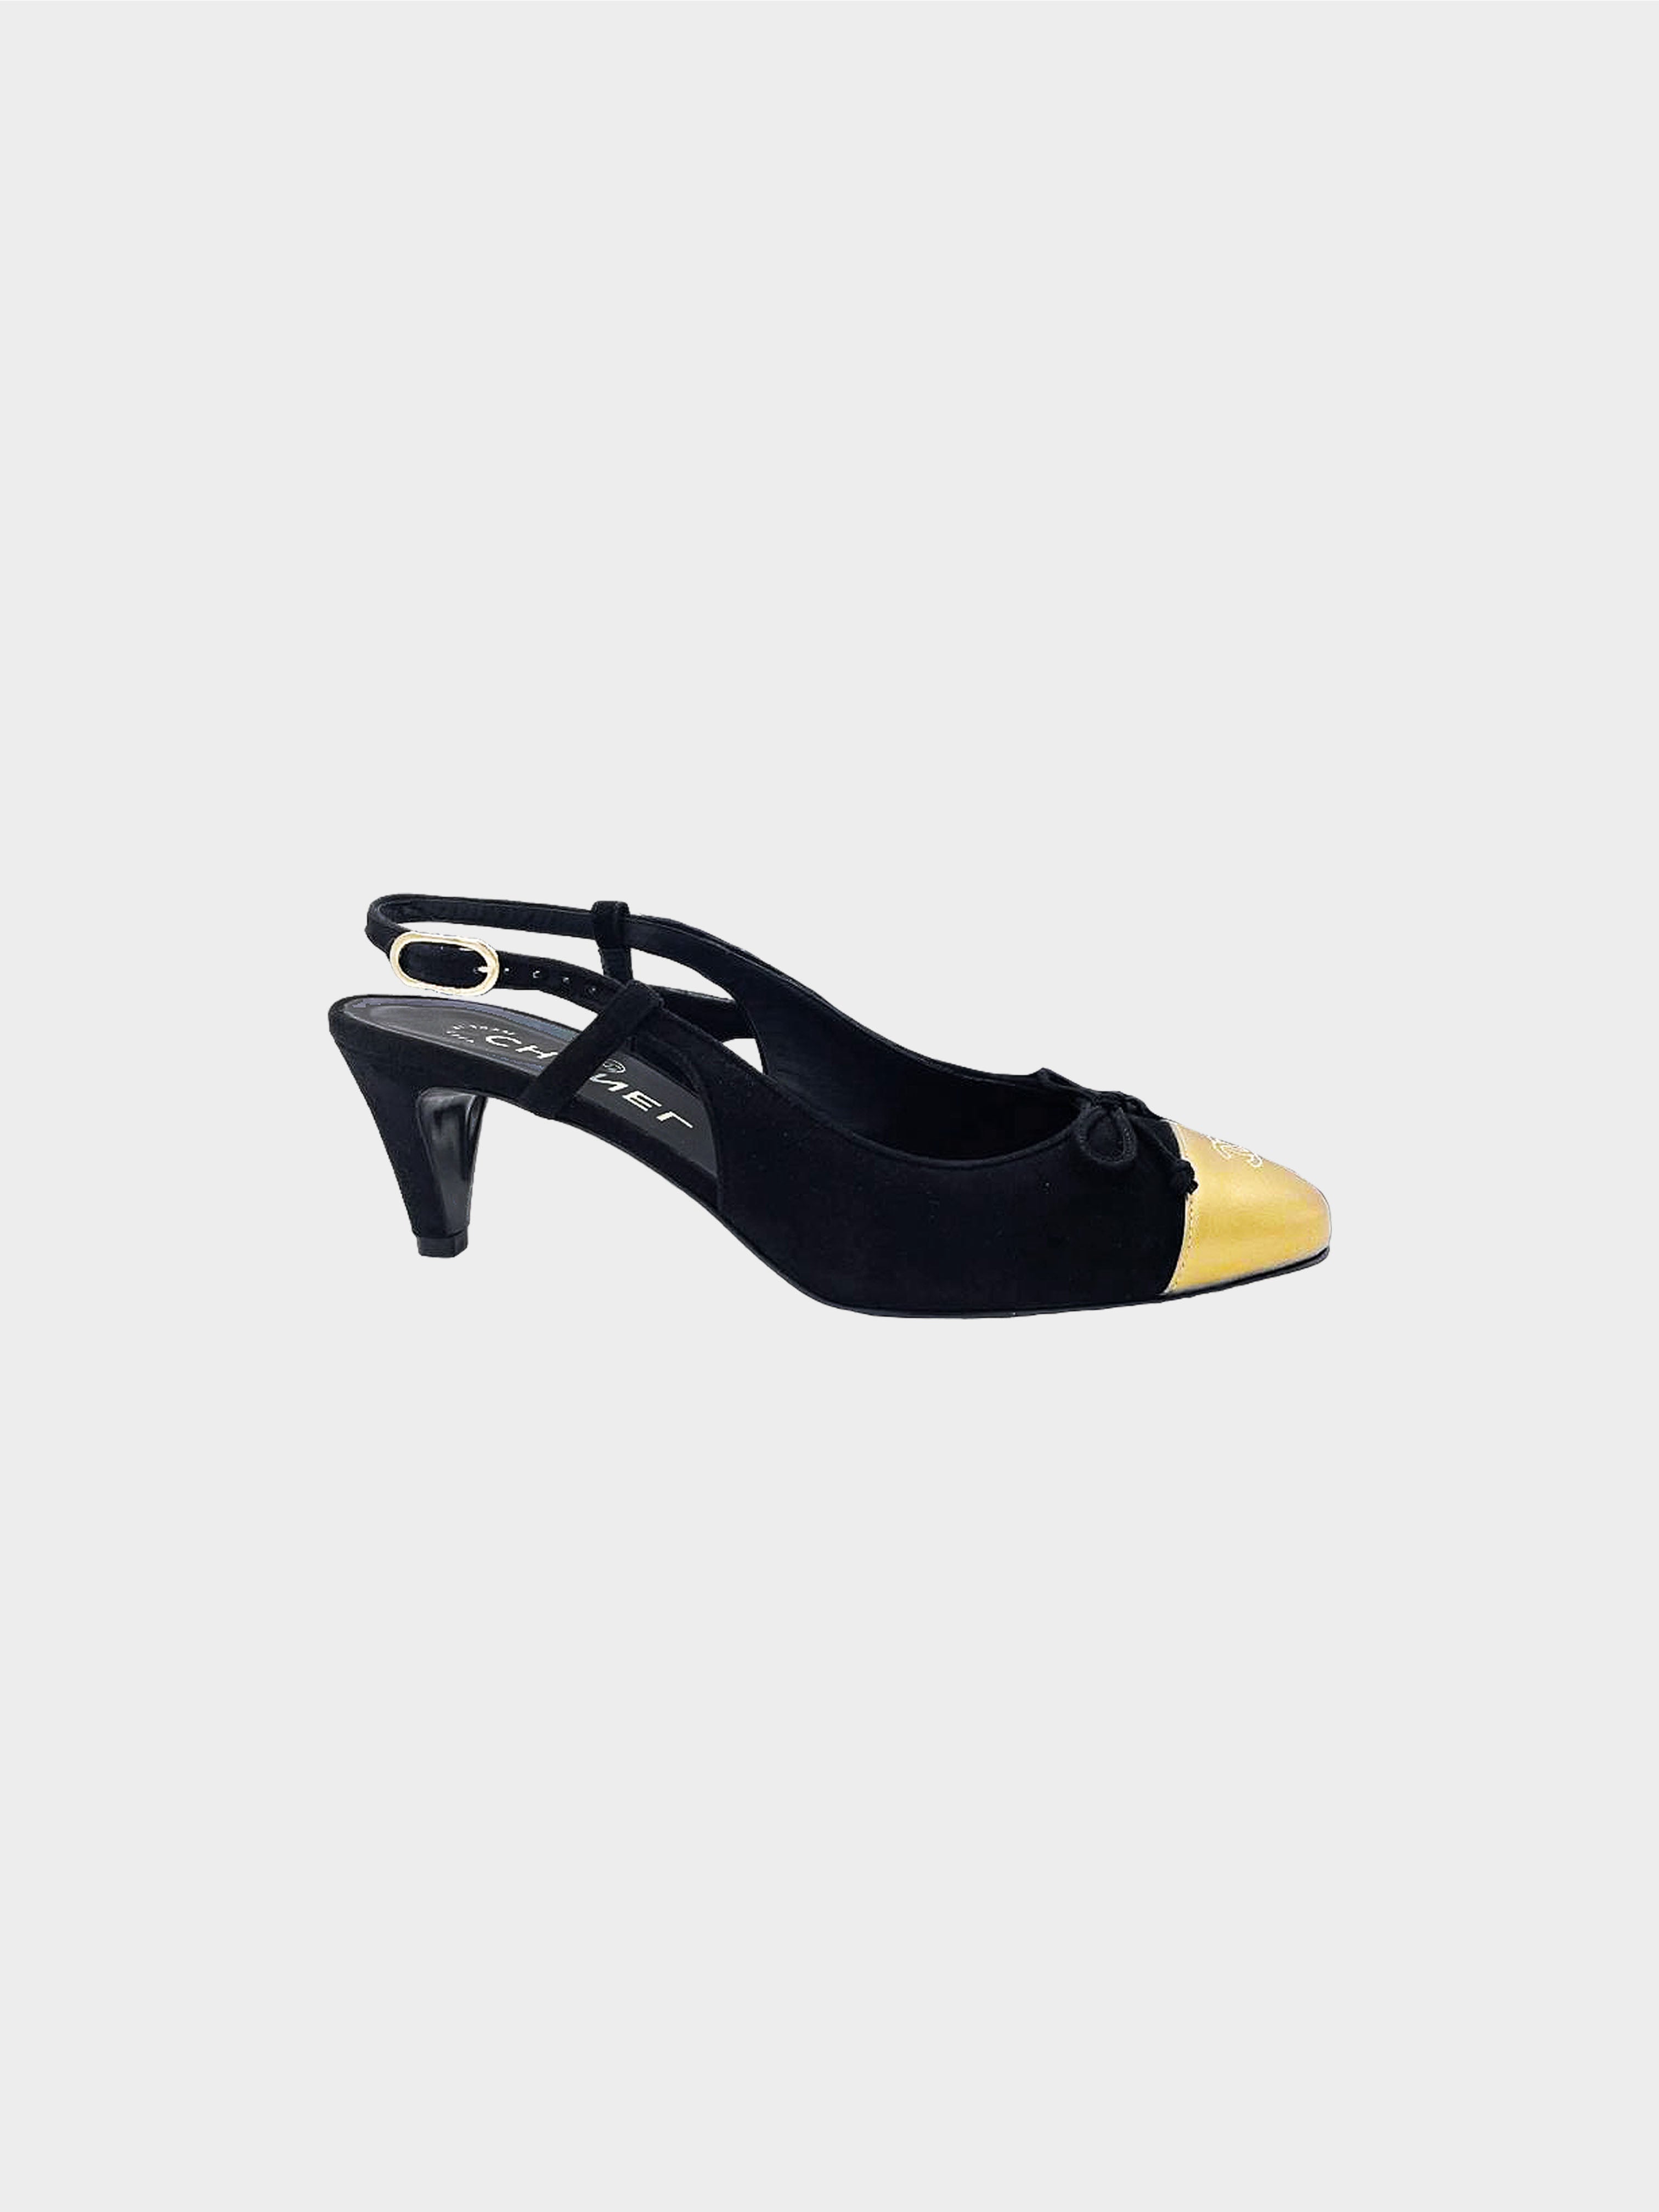 Chanel 2000s Black and Gold Two-toned Slingback Heels